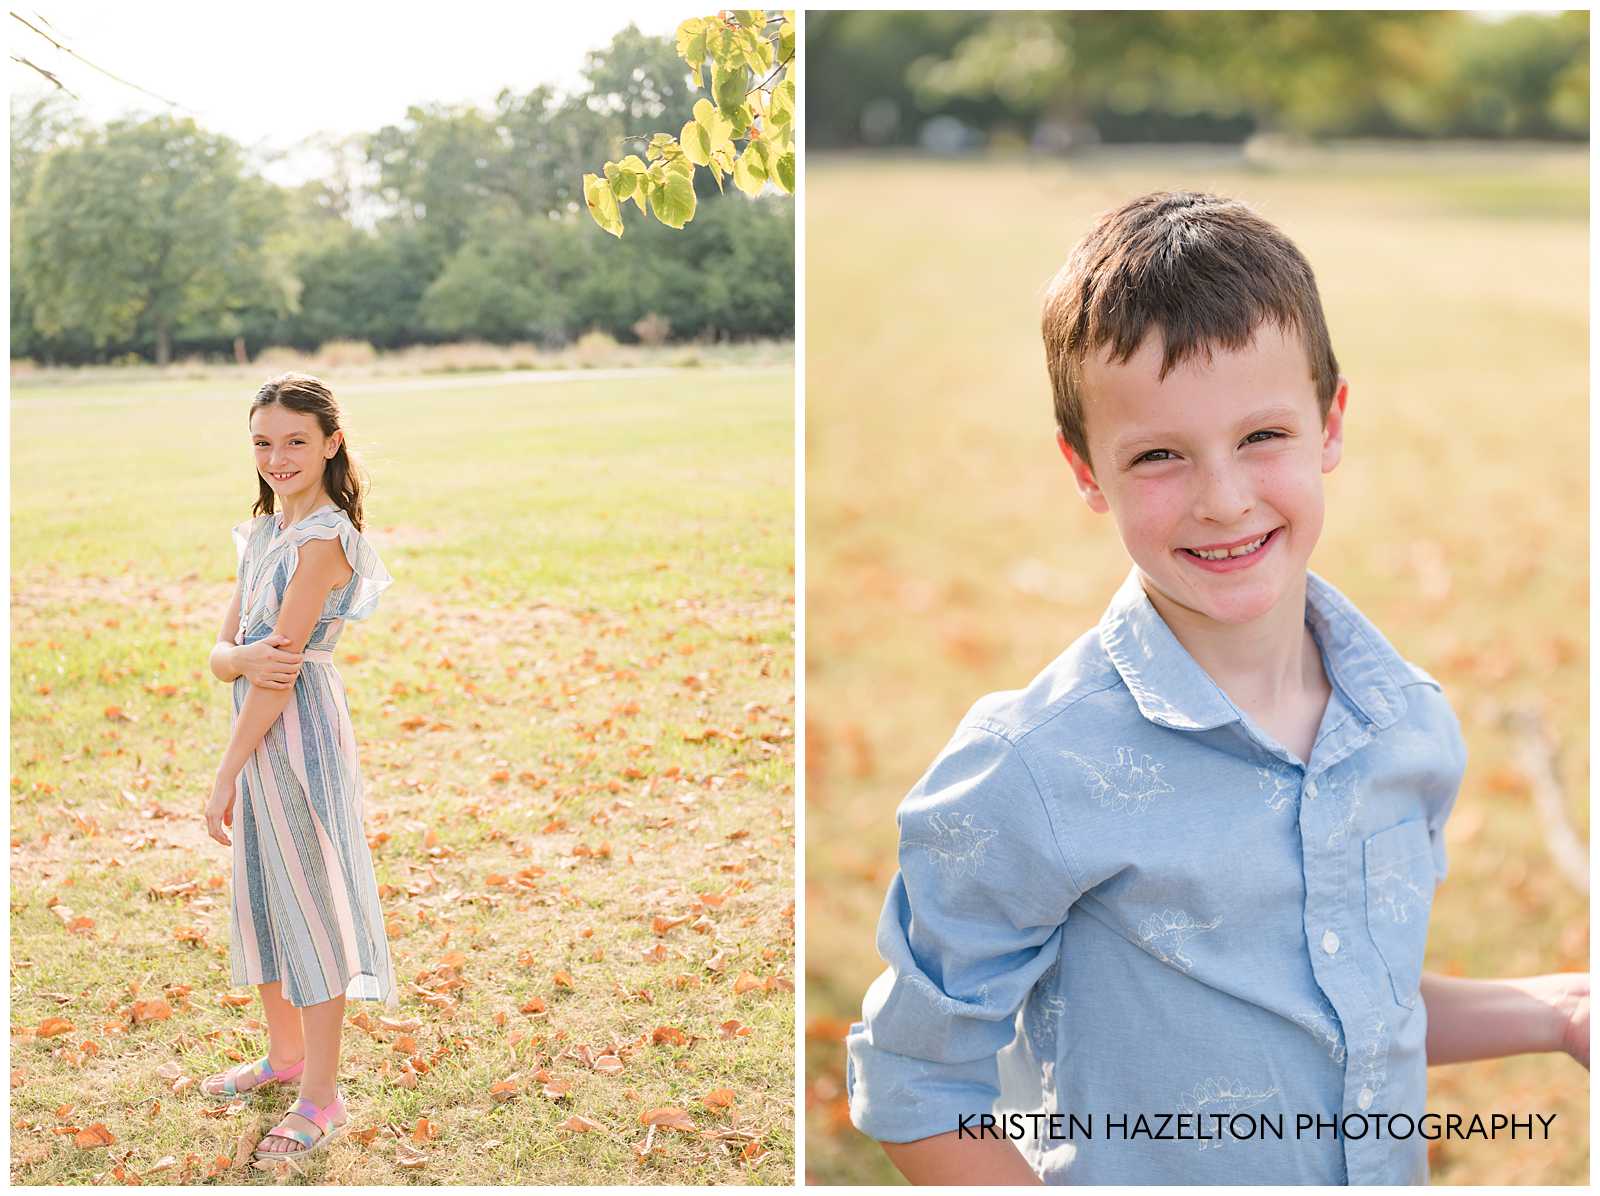 Portraits of a young girl and boy by Elmwood Park, IL photographer Kristen Hazelton